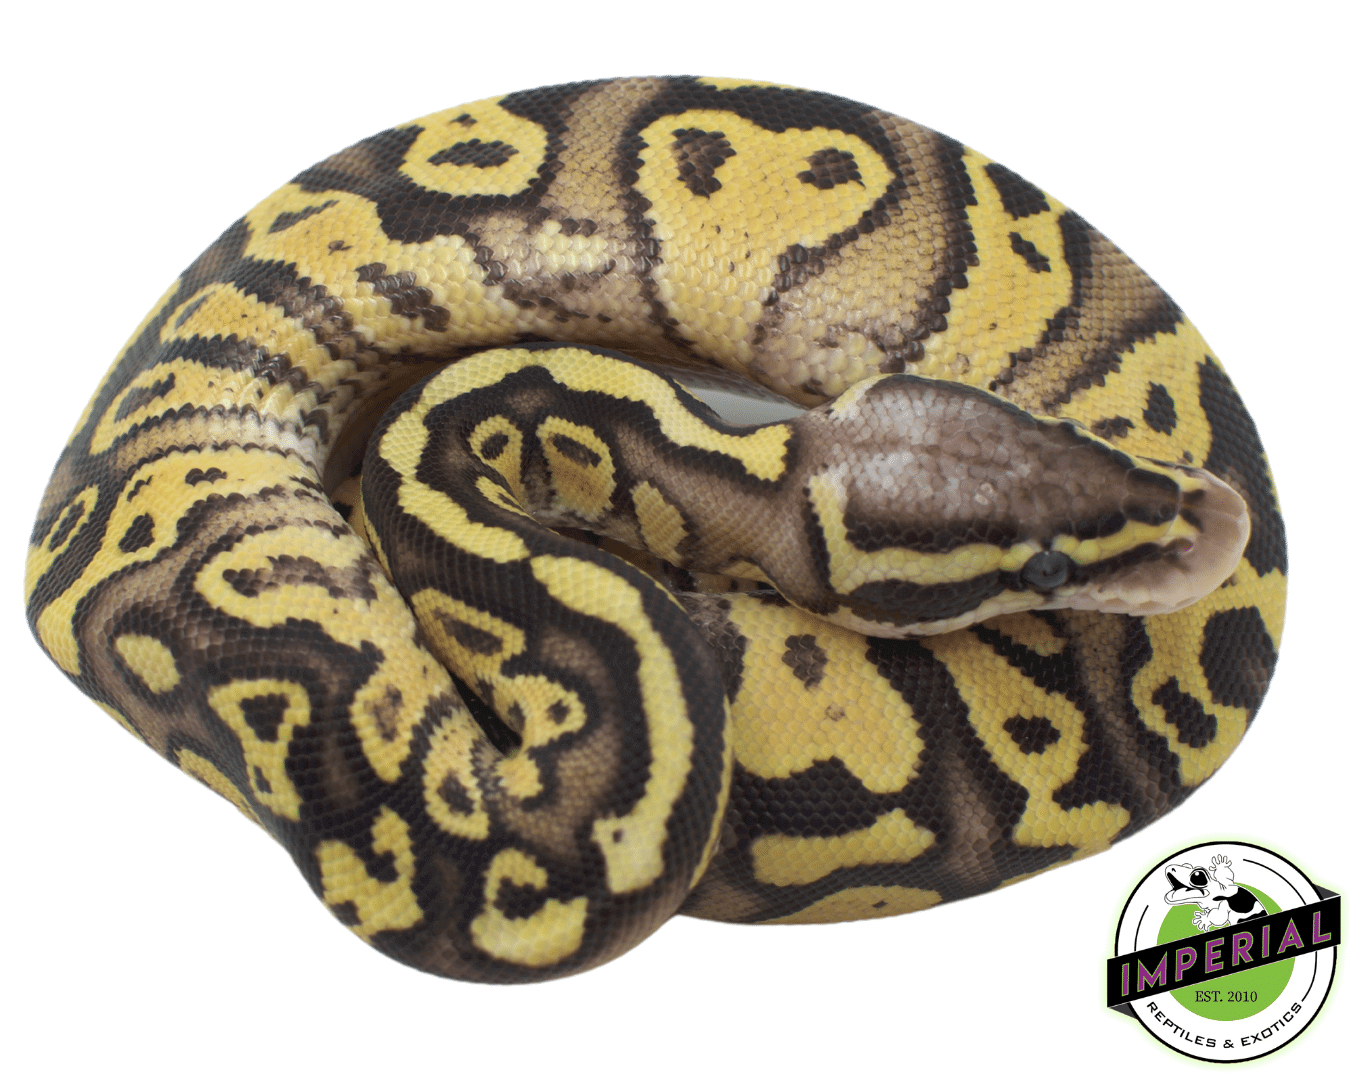 firefly ball python for sale, buy reptiles online